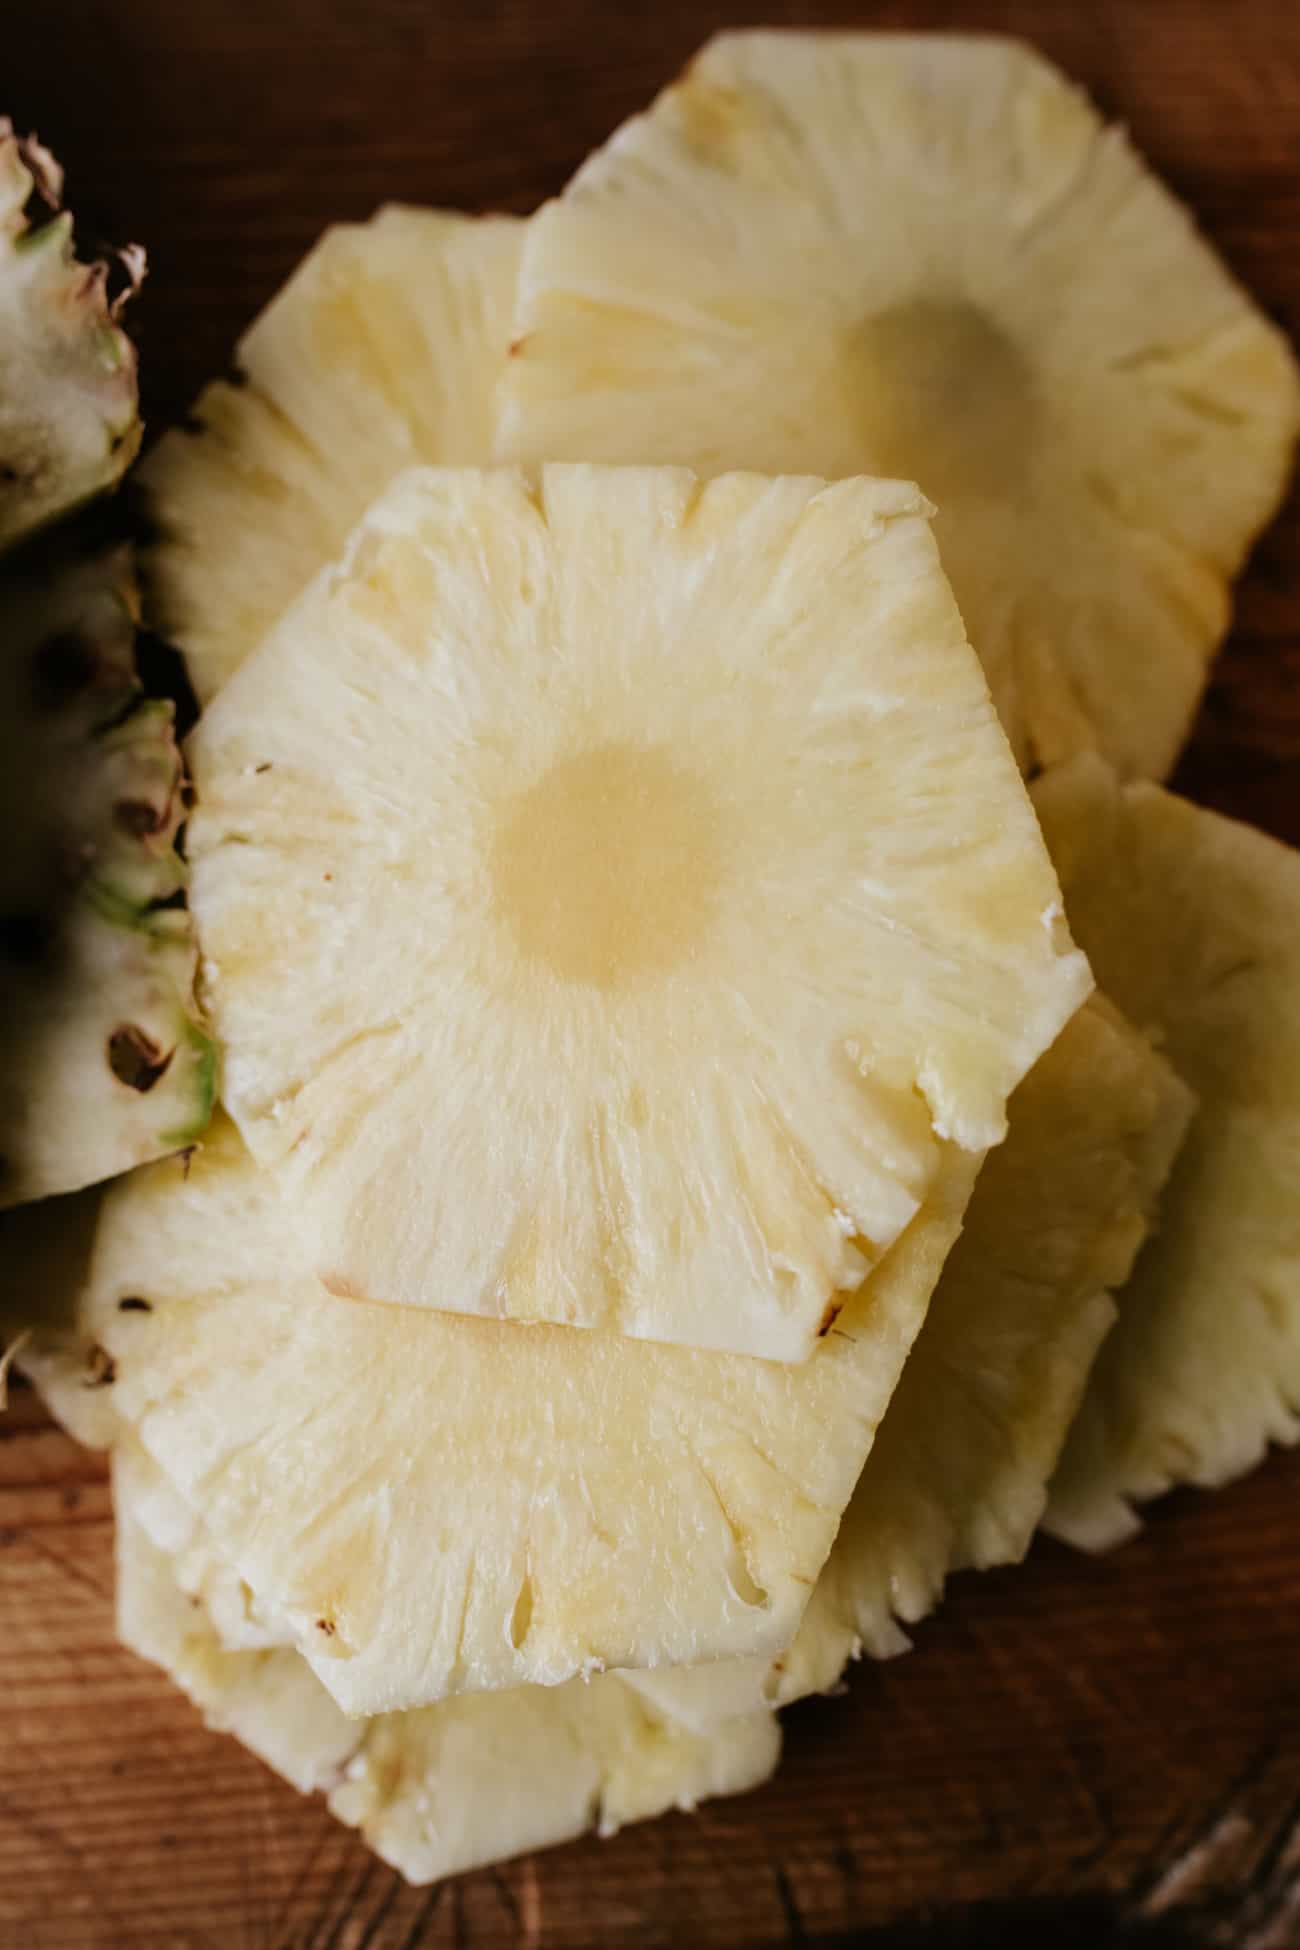 Close up of fresh pineapple slices on a wooden board.